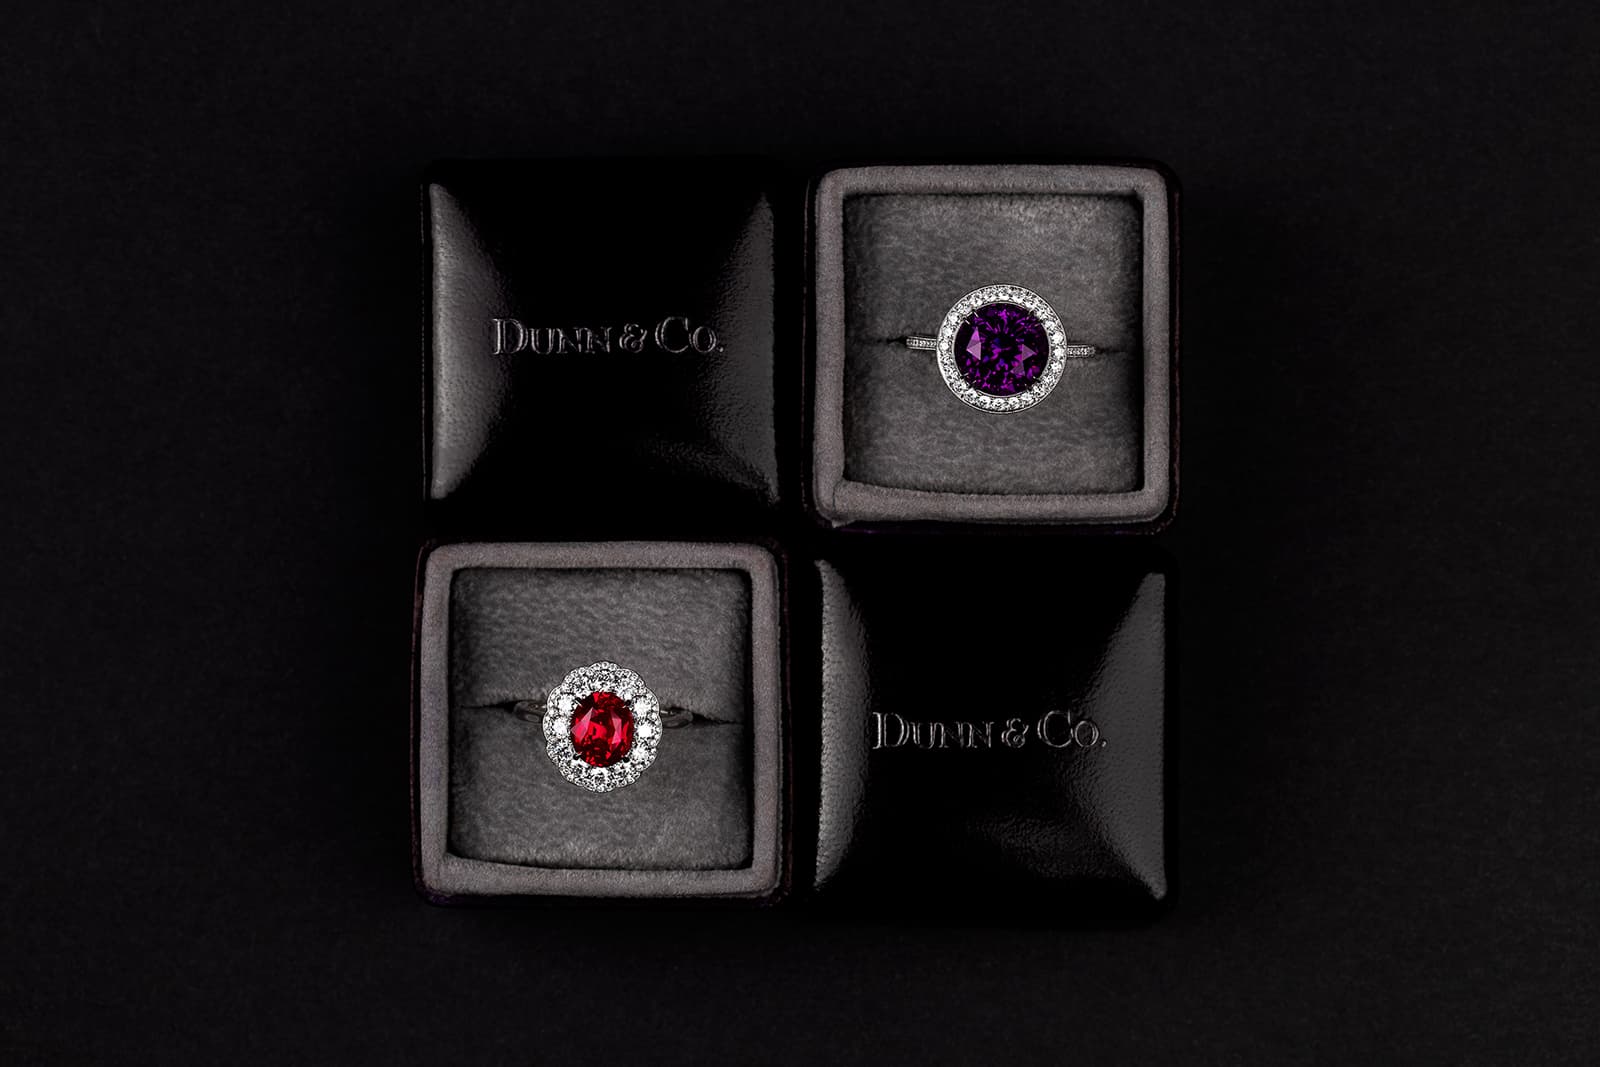 A qualified gemmologist, Dunn's designs are always inspired by the stones, which are the focal point of each jewel